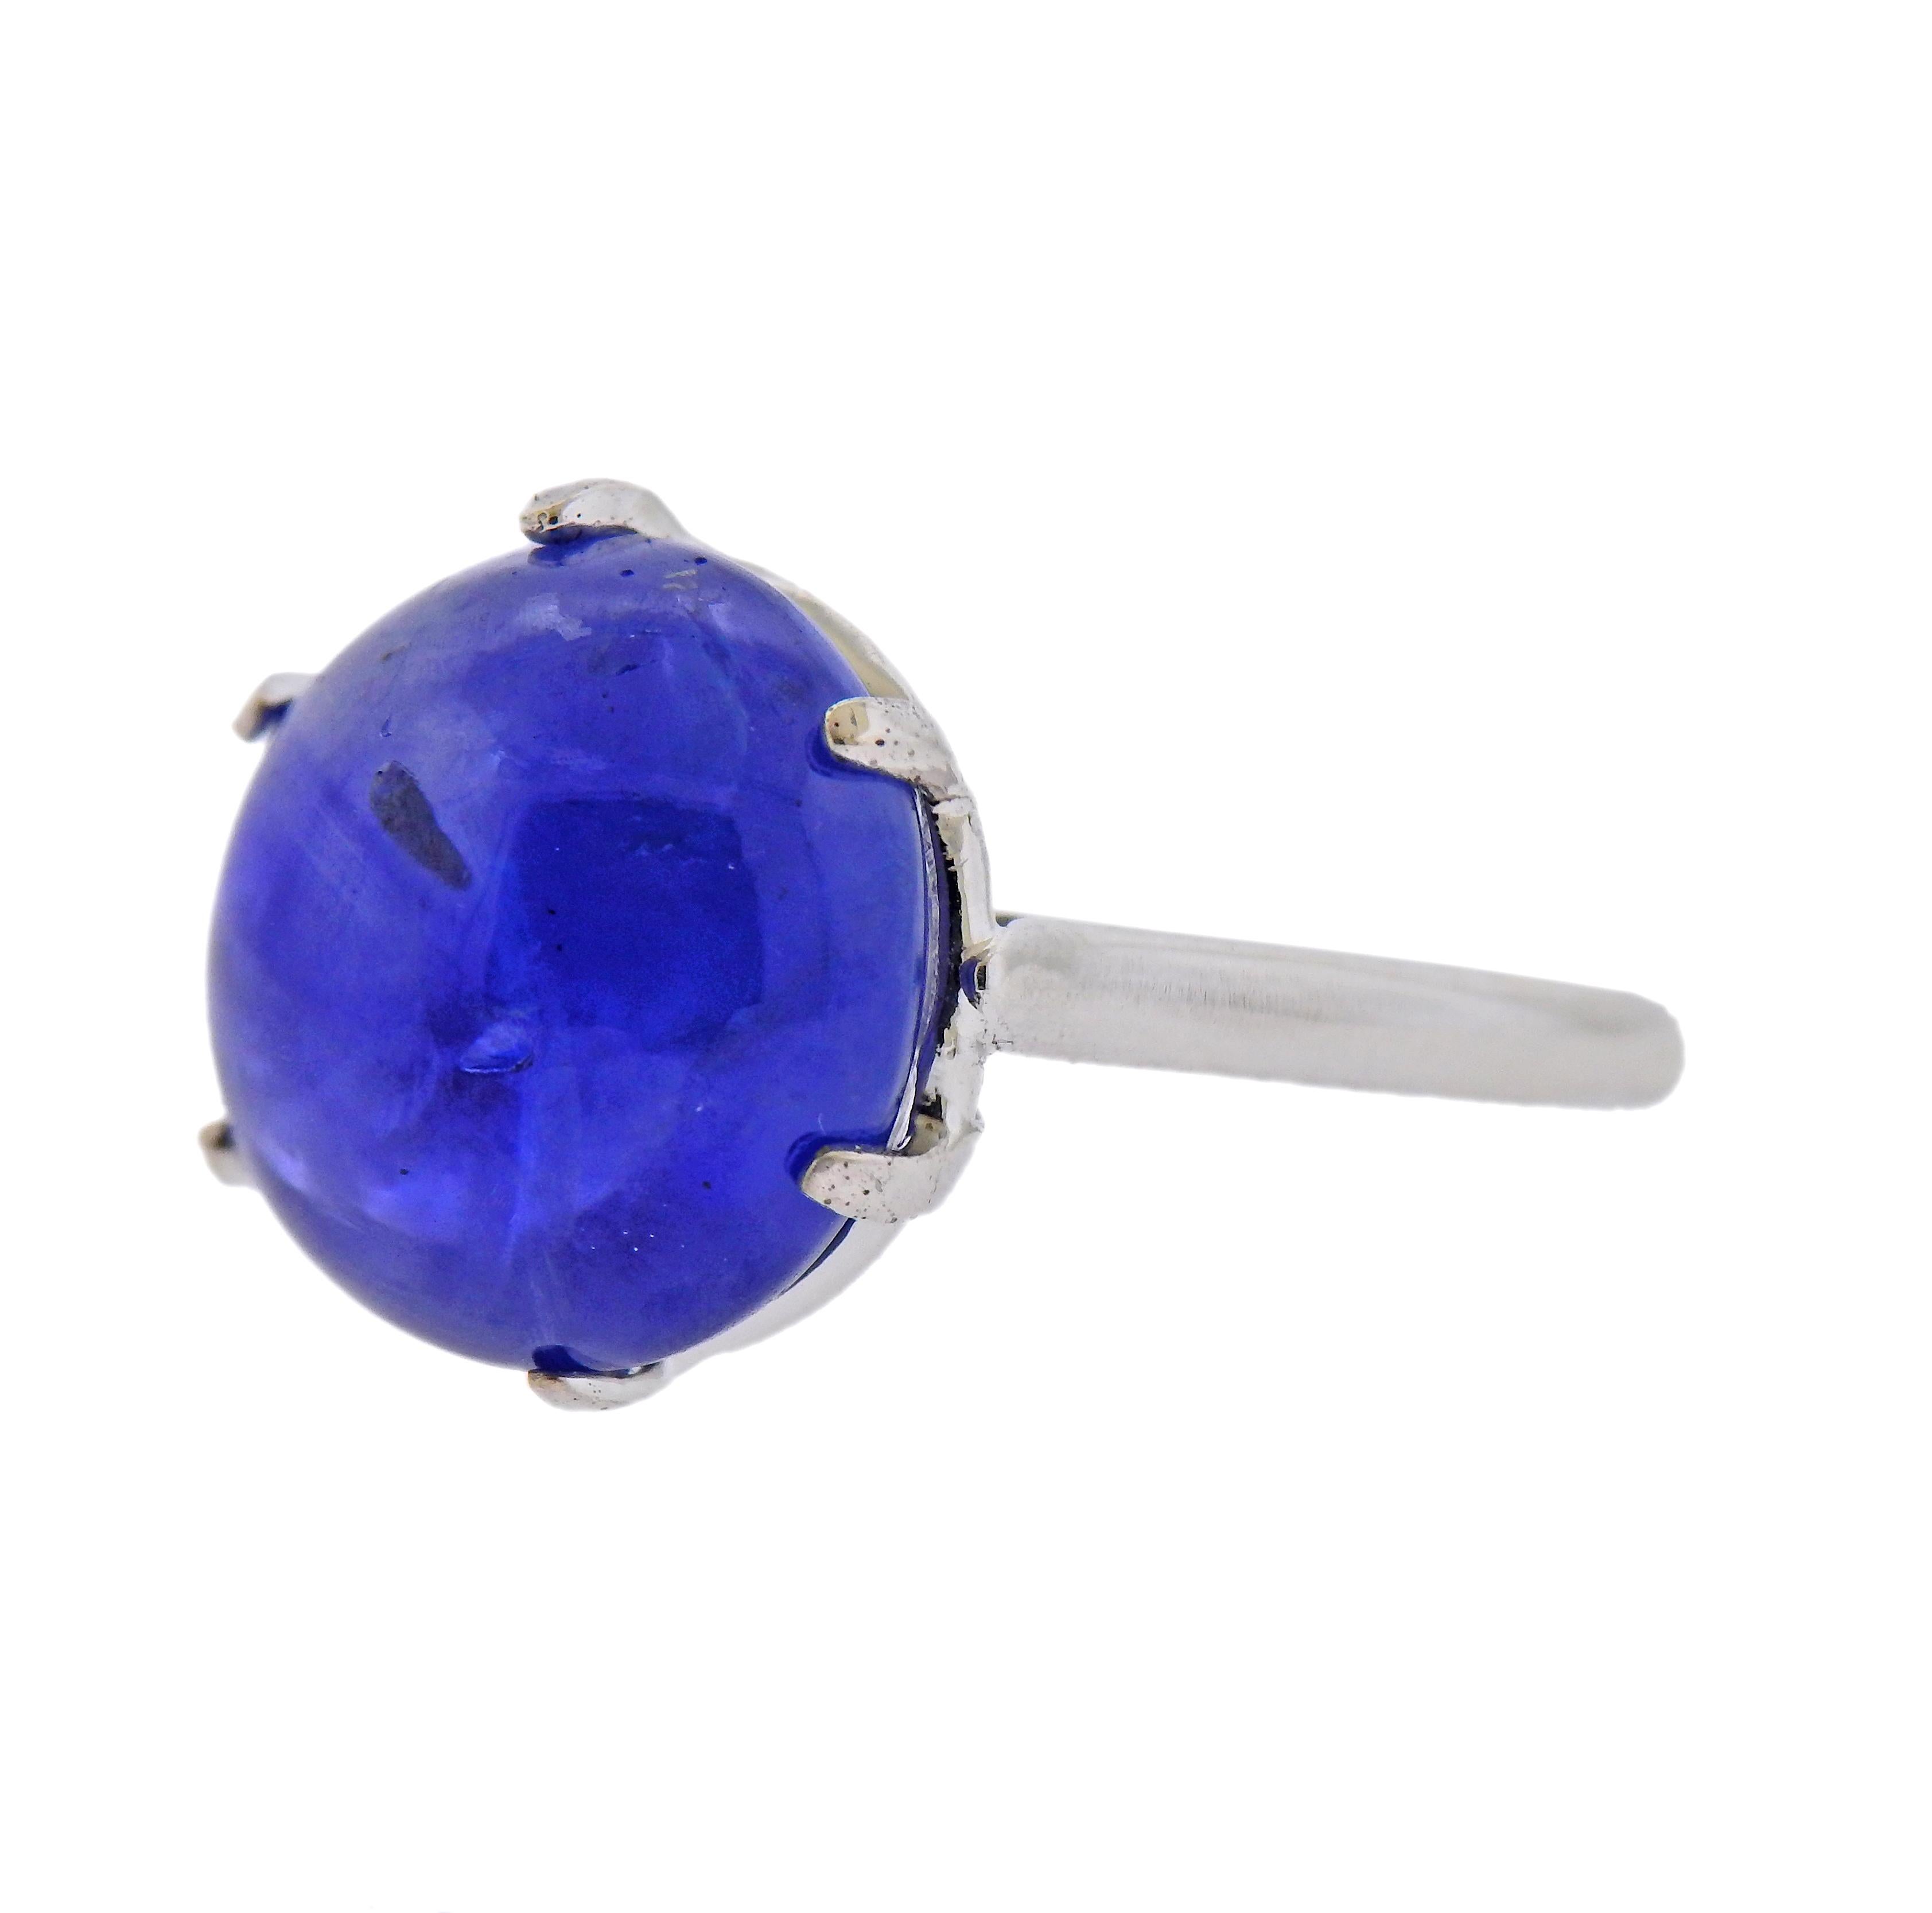 18k white gold ring, set with a no heat Burma sapphire cabochon - approx. 15.65ct, measuring approx. 13.45 x 12.83 x 8.4mm. Marked with a gold assay mark on the outside of the shank. Weight - 7.7 grams. 